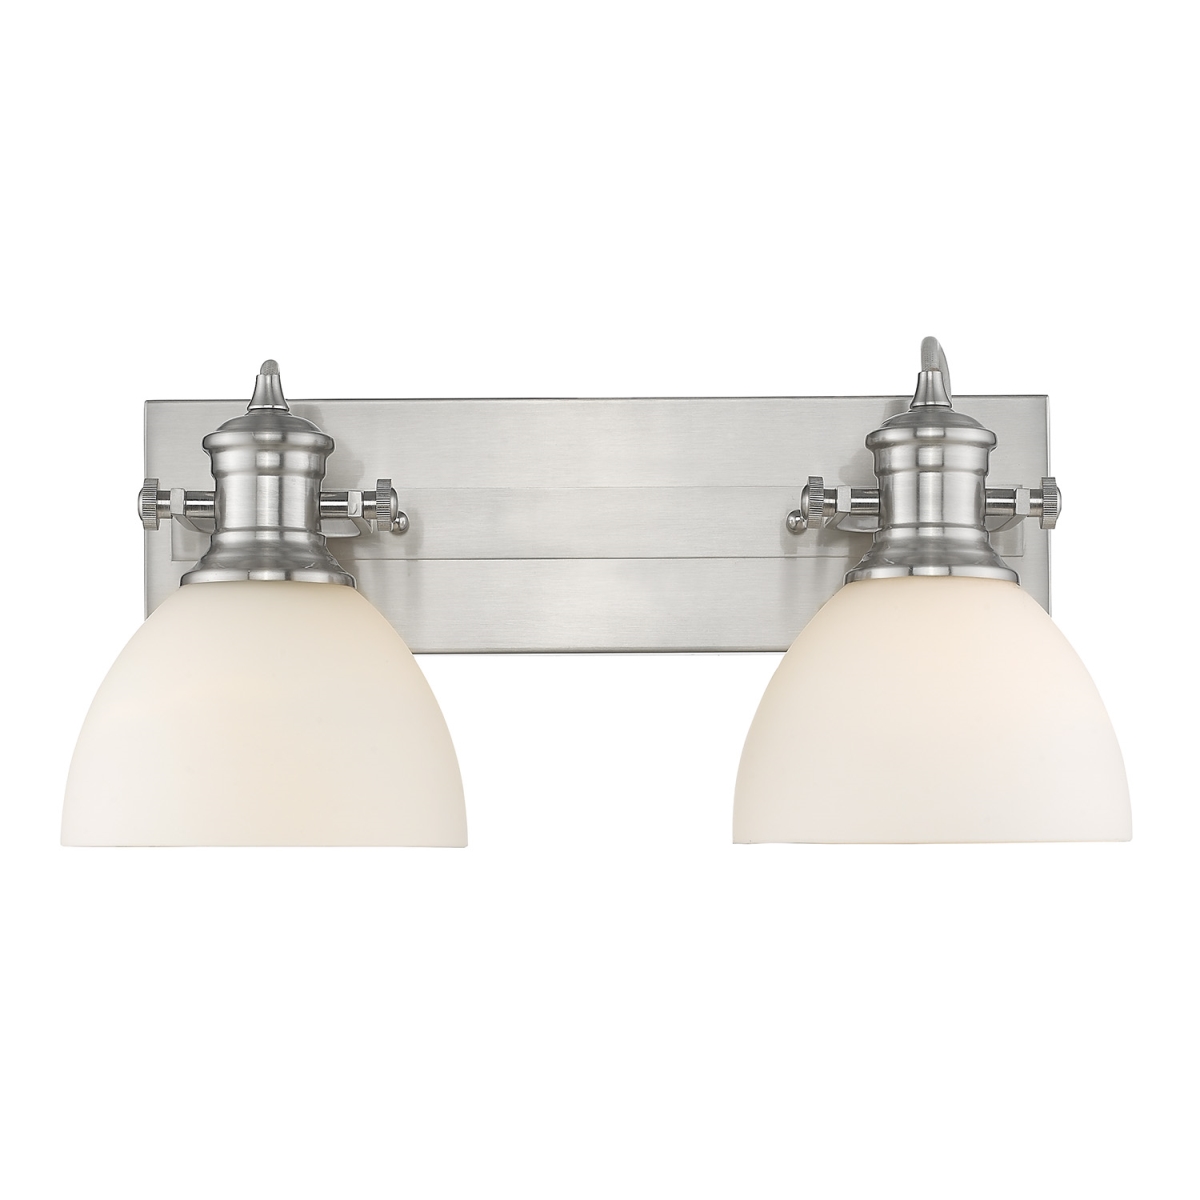 3118-ba2 Pw-op 18 In. Hines 2 Lights Pewter Bath Fixture Wall Light With Opal Glass, Silver - 120v